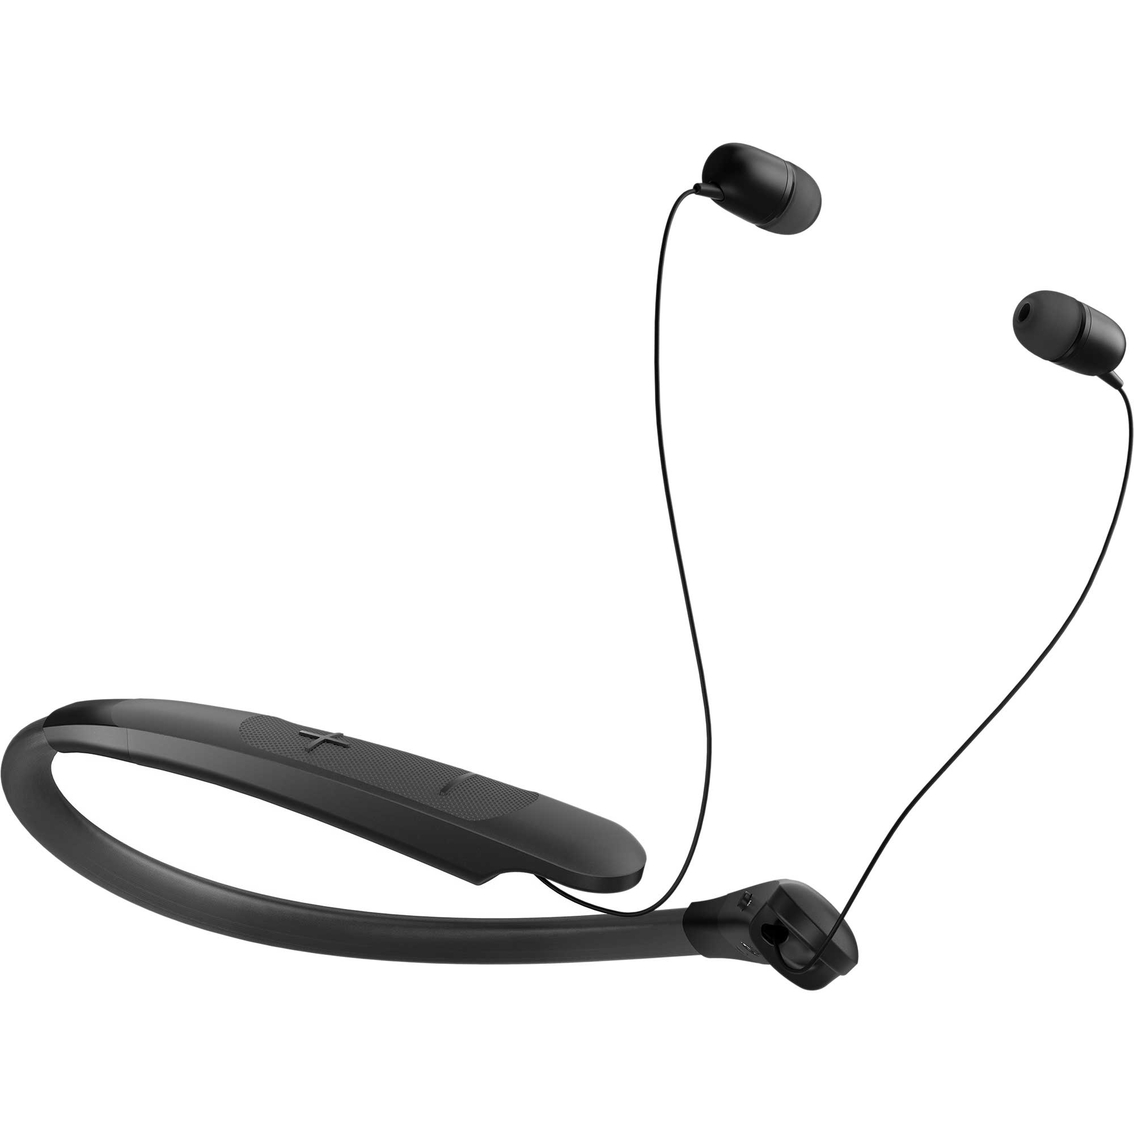 LG TONE NP3 Wireless Stereo Headset - Image 2 of 4